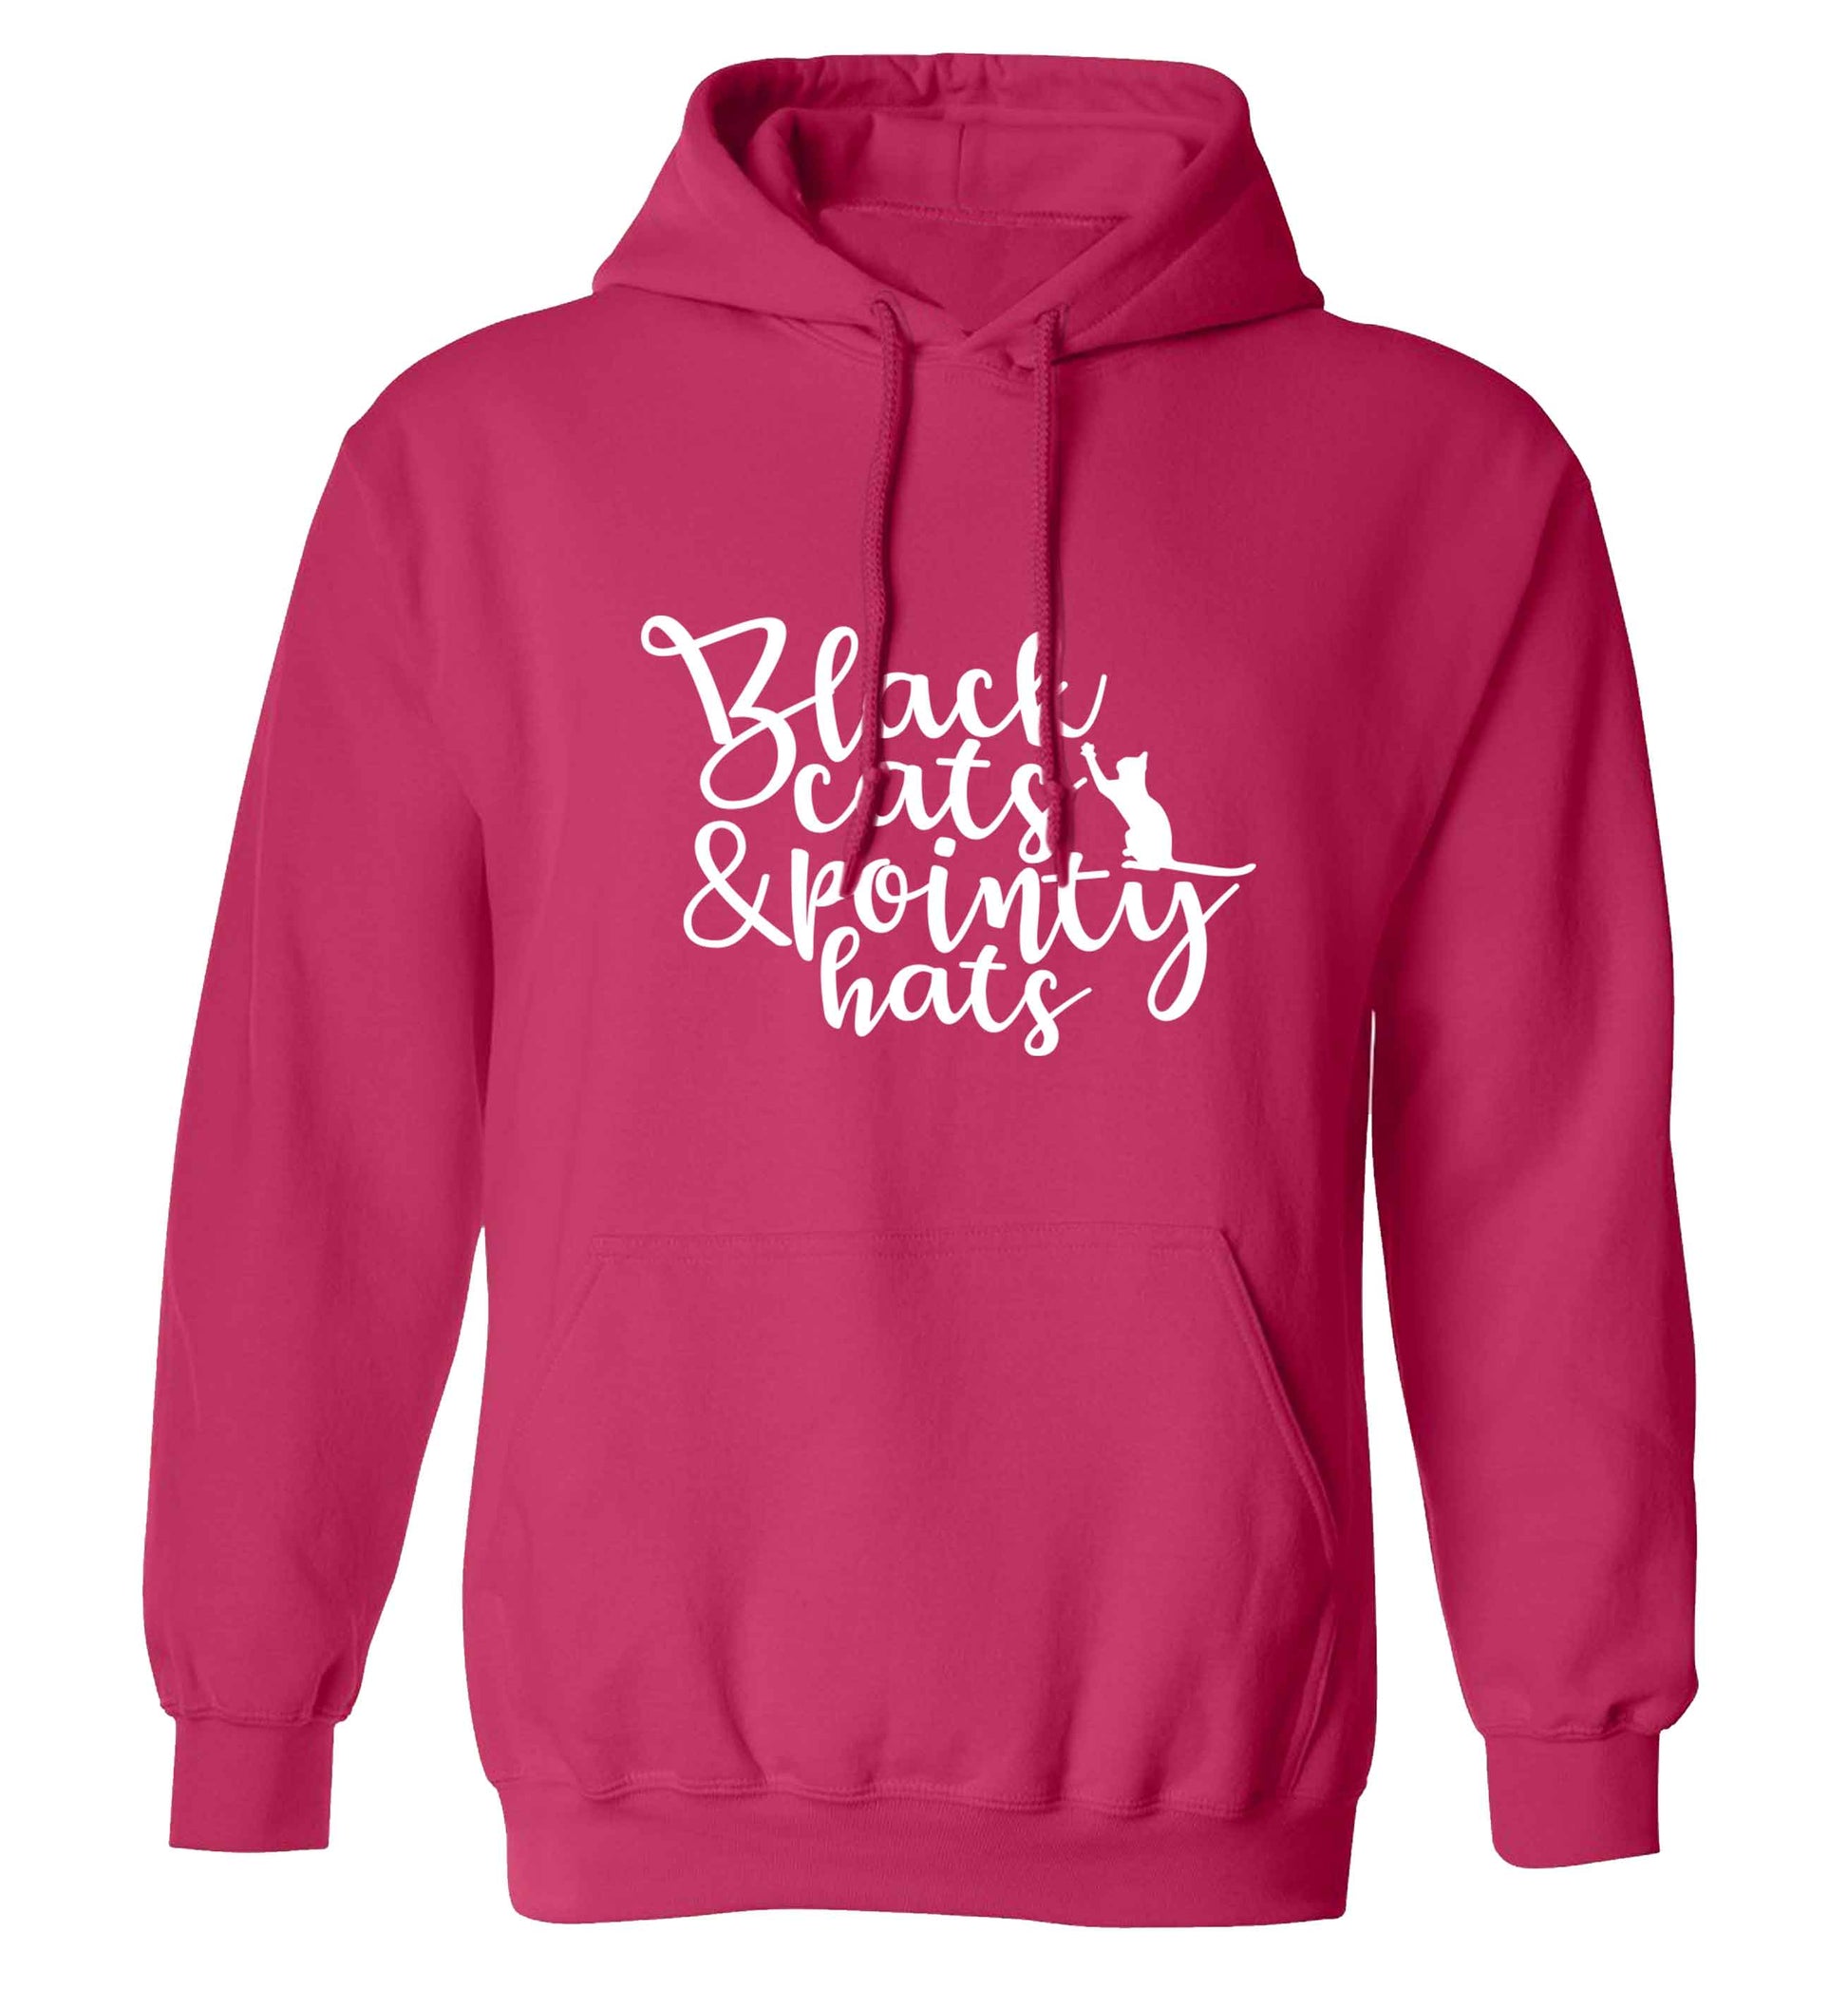 Black cats and pointy hats adults unisex pink hoodie 2XL